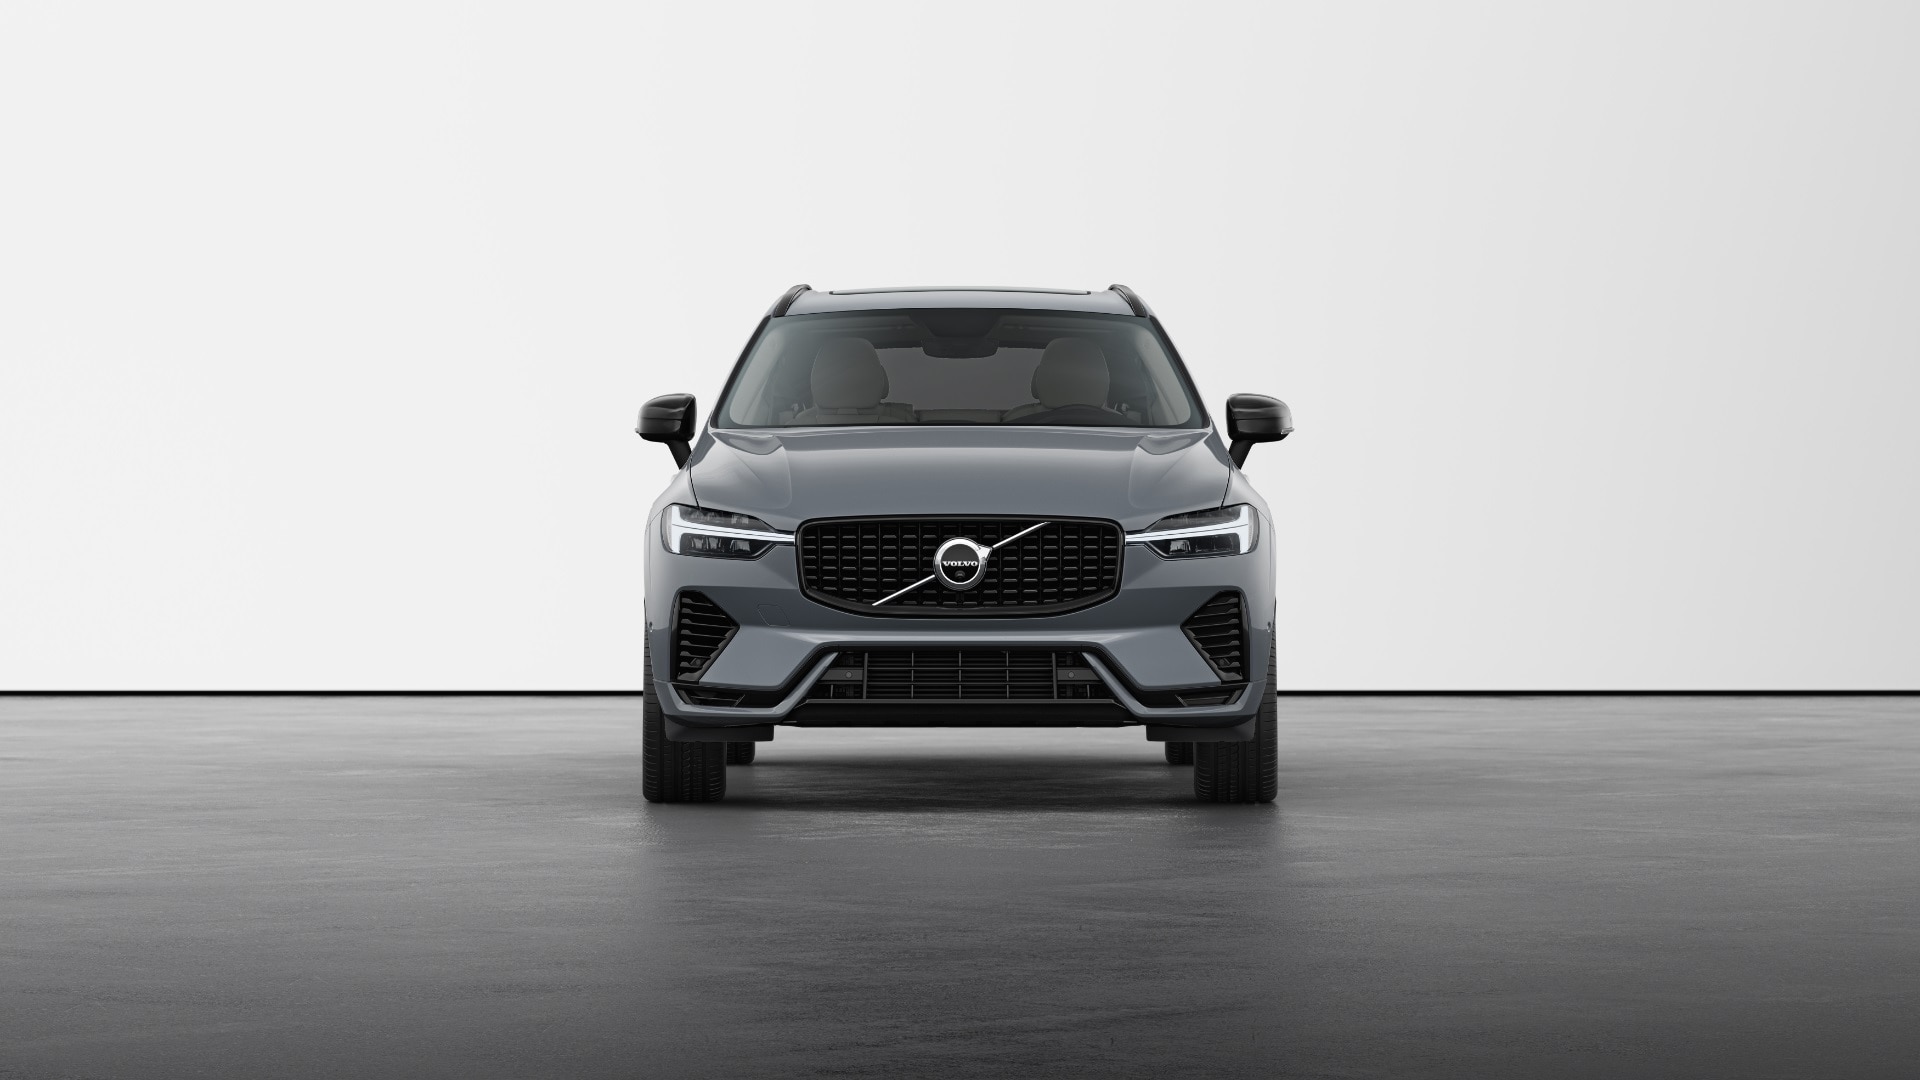 Volvo XC60 Recharge 2.0 T6 [350] RC PHEV Plus Dark 5dr AWD Geartronic Image 2